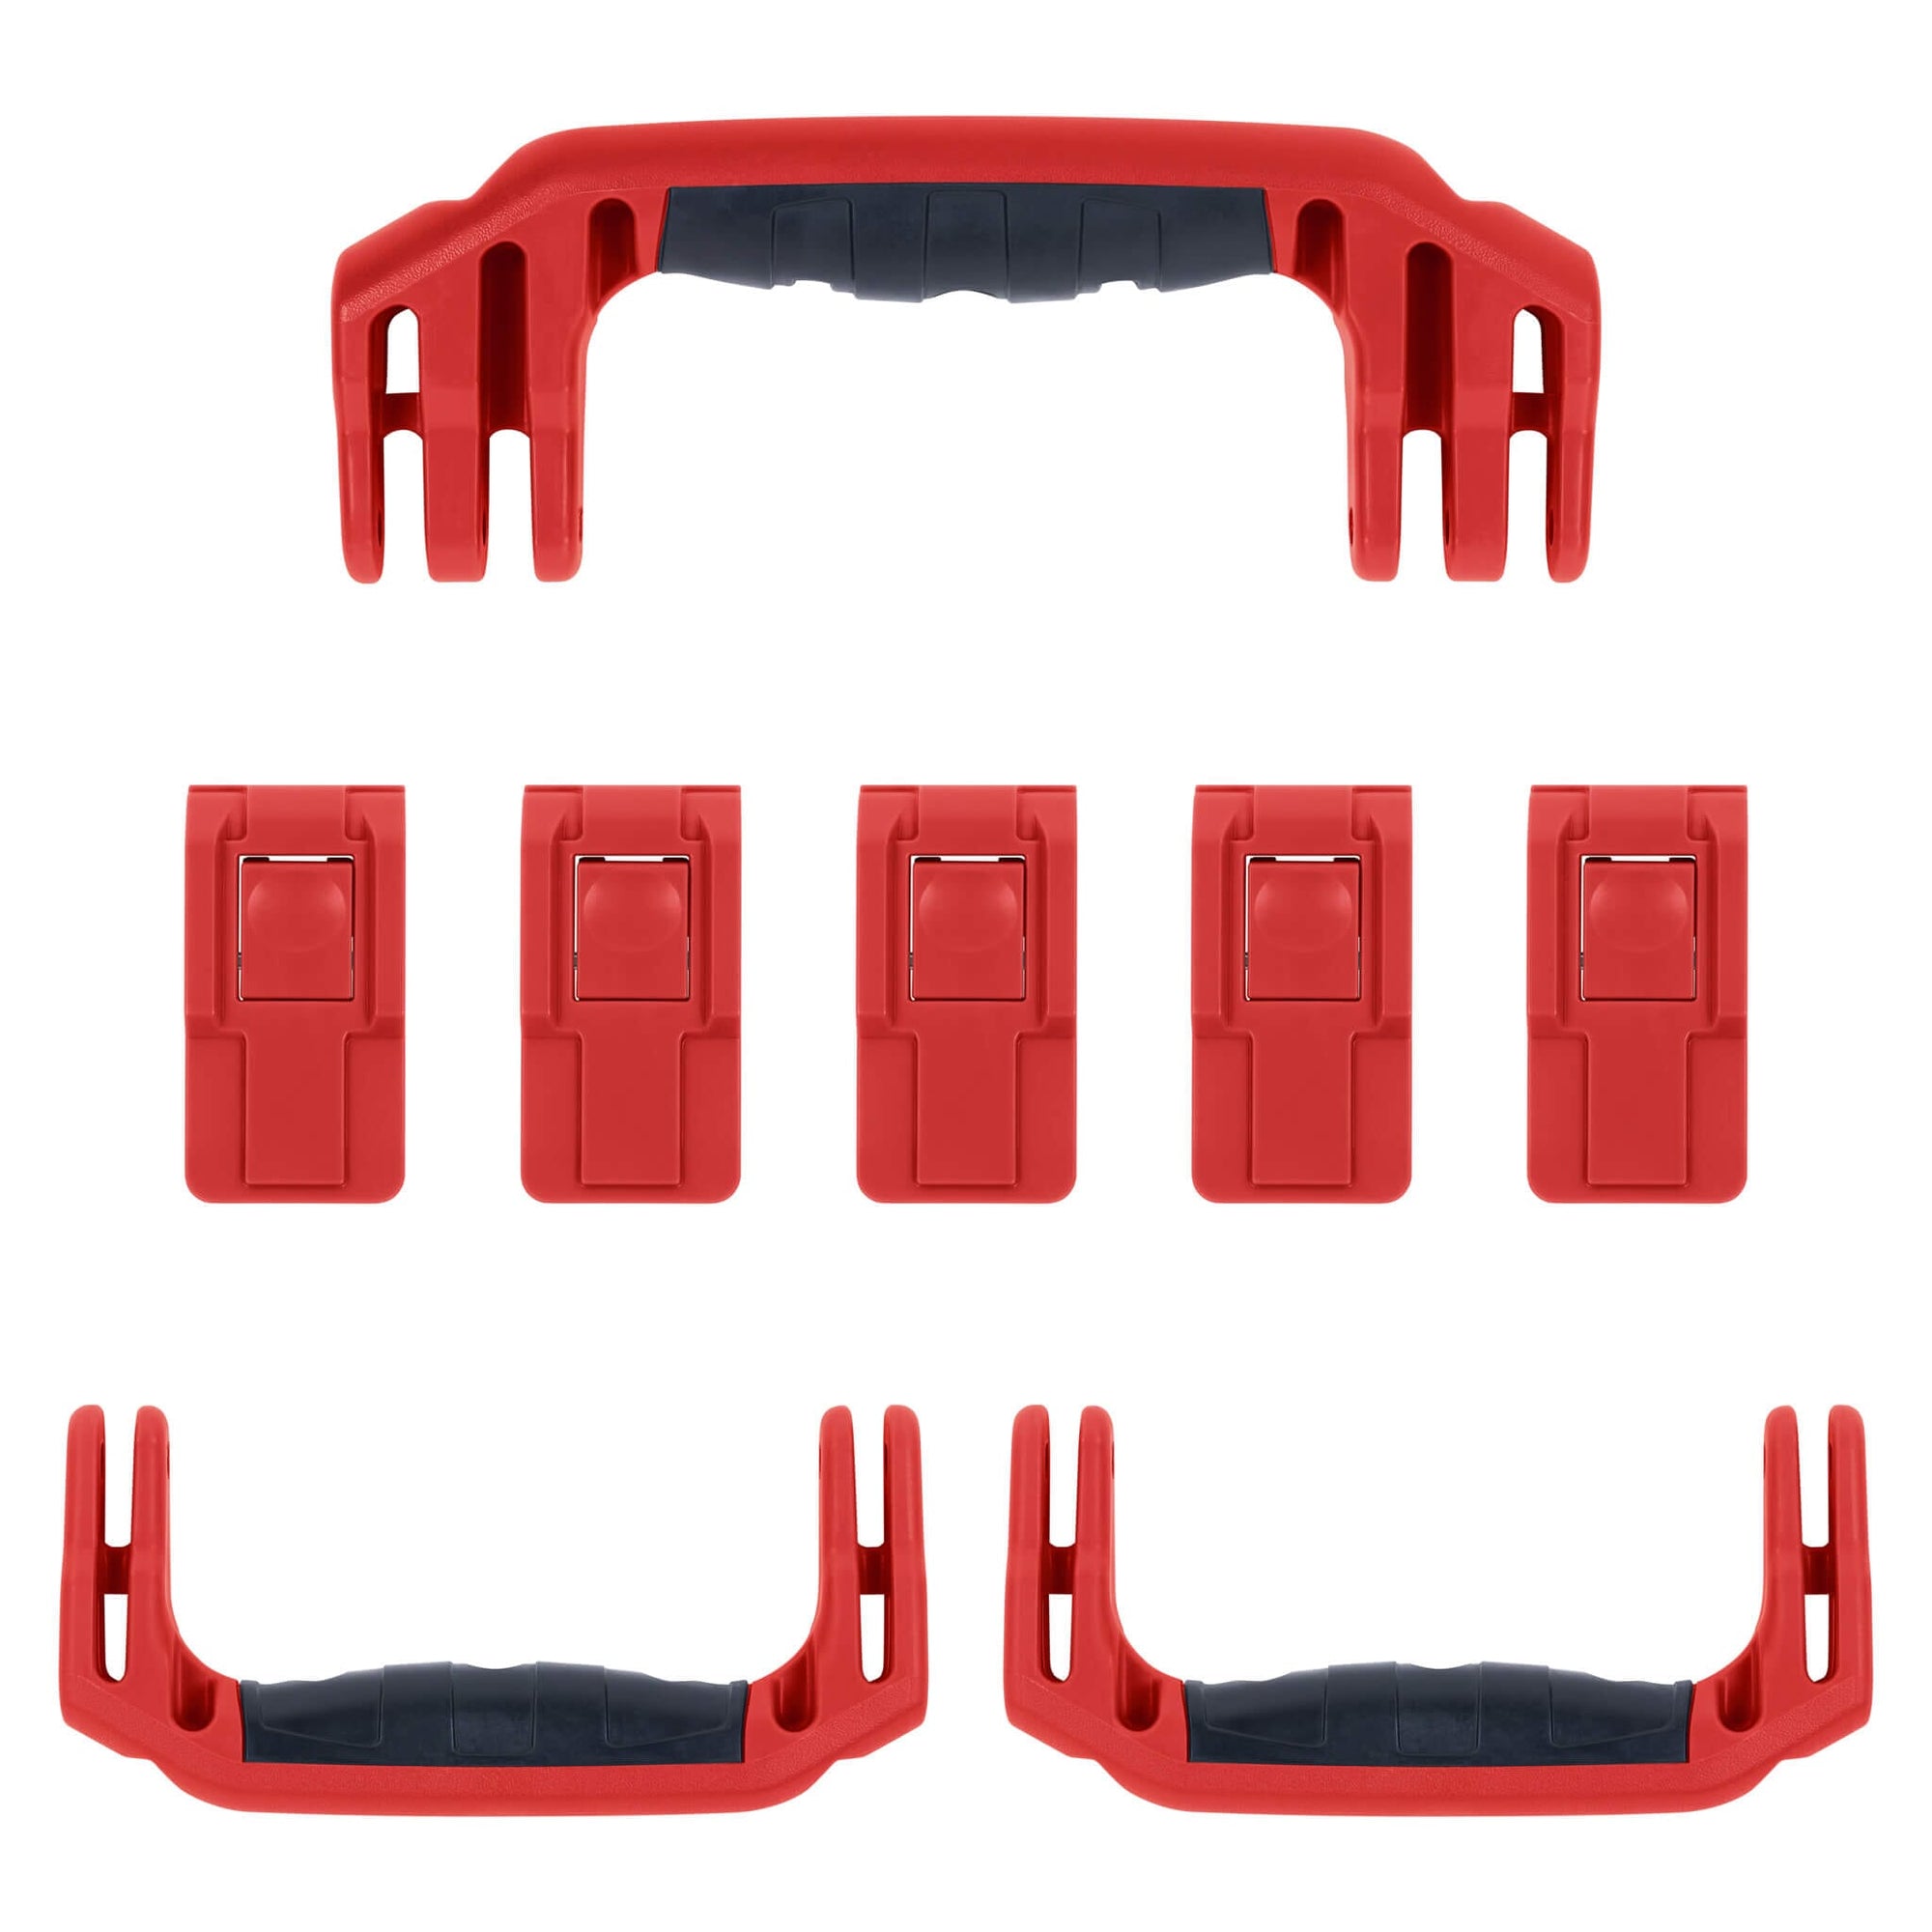 Pelican 1595 Air Replacement Handles & Latches, Red (Set of 3 Handles, 5 Latches) ColorCase 